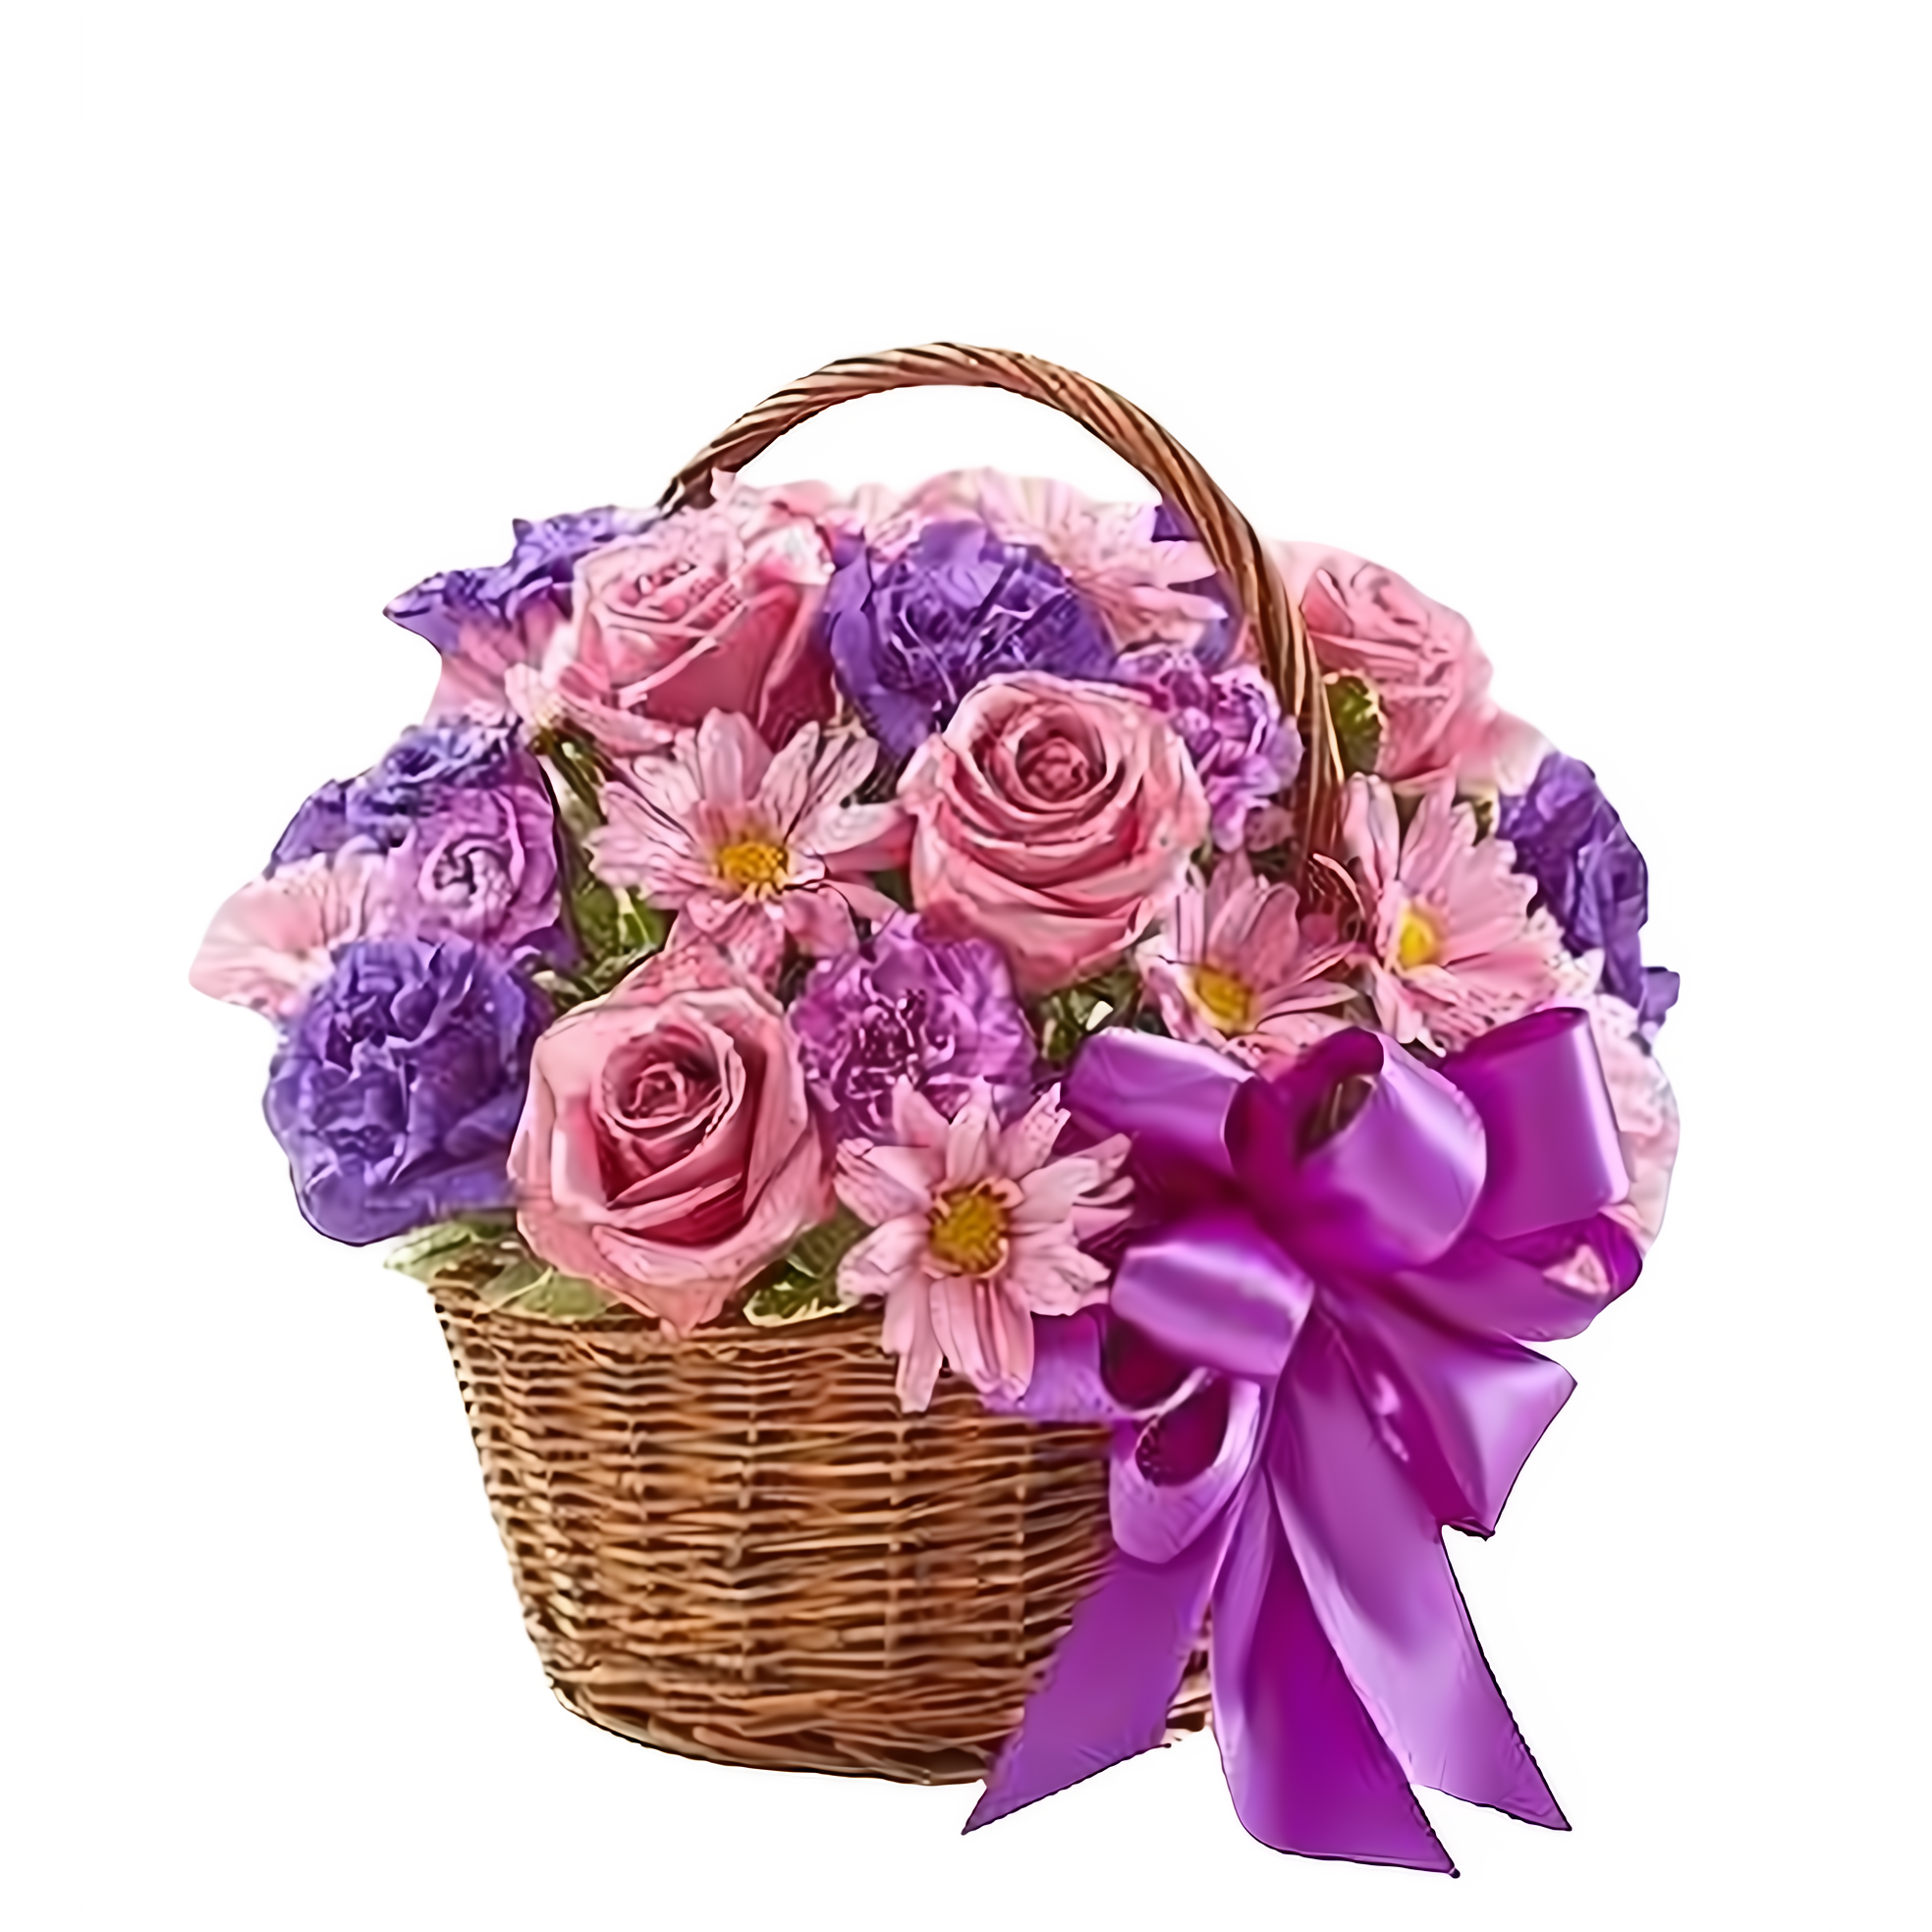 Manhattan Flower Delivery - Basket of Blooms - Seasonal > Mother's Day - 5/9